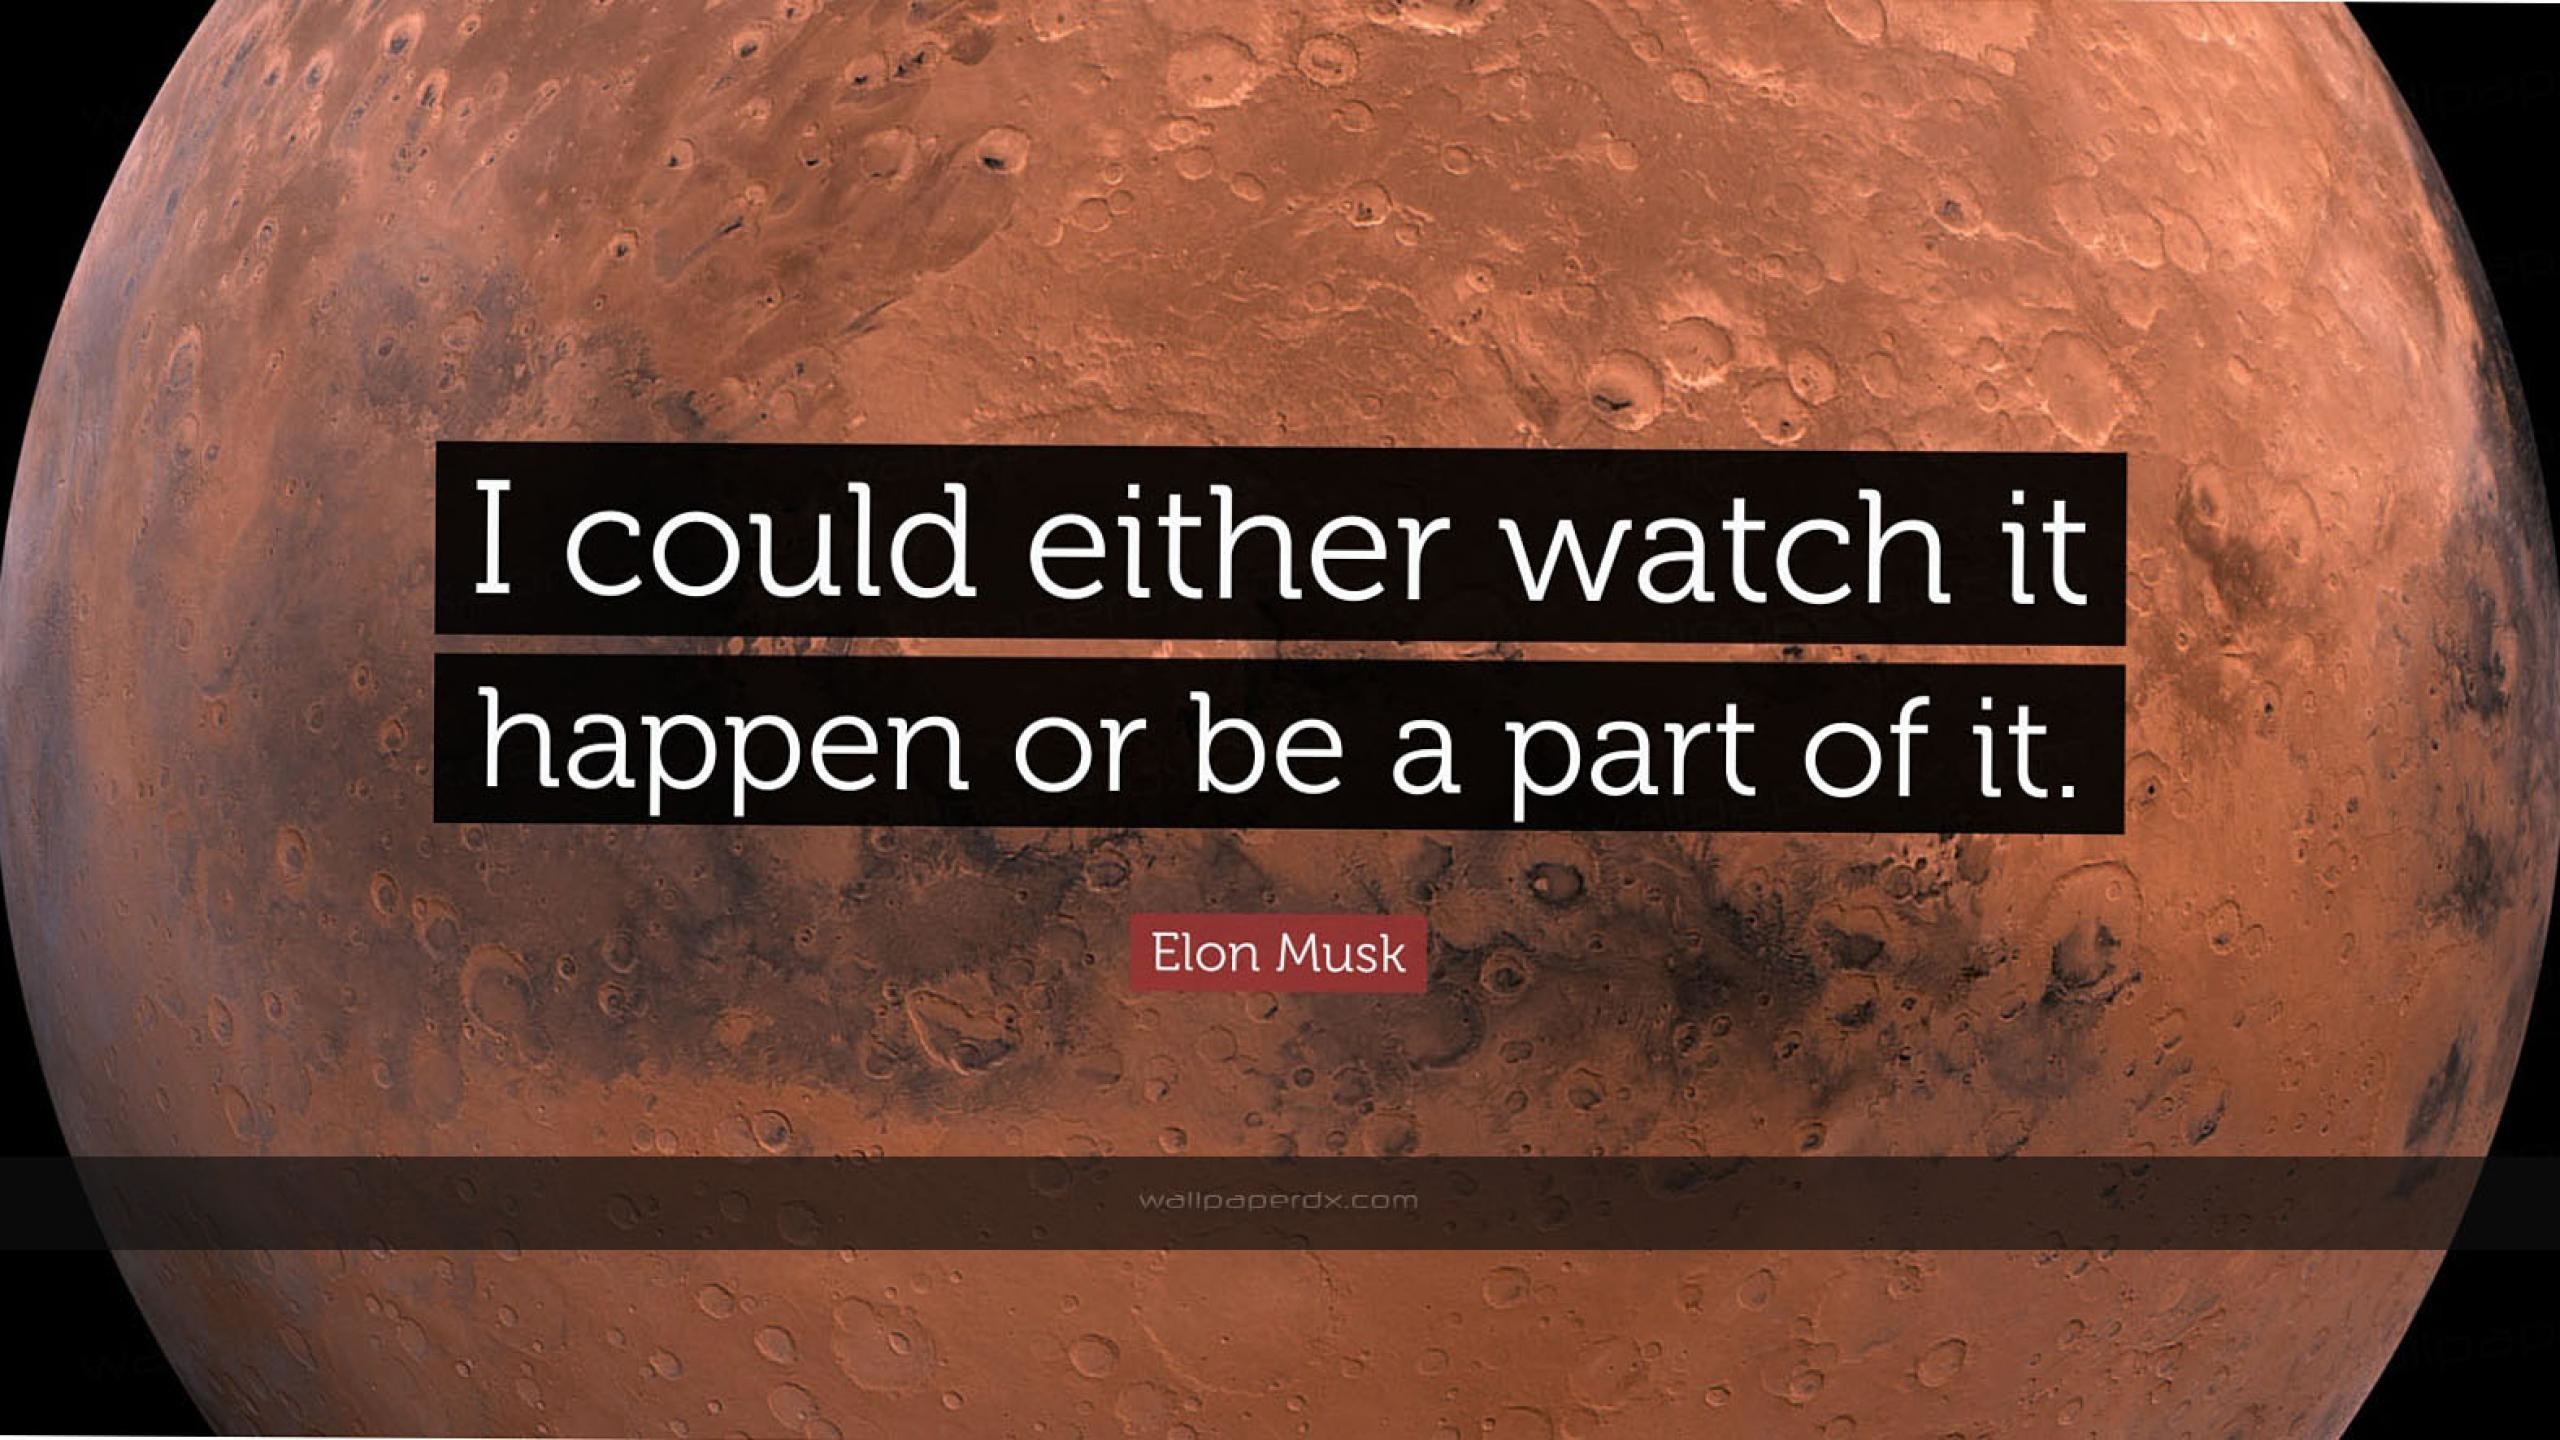 2341 elon musk quote i could either watch it happen or be a part of it hd wallpaper – 2560 x 1440